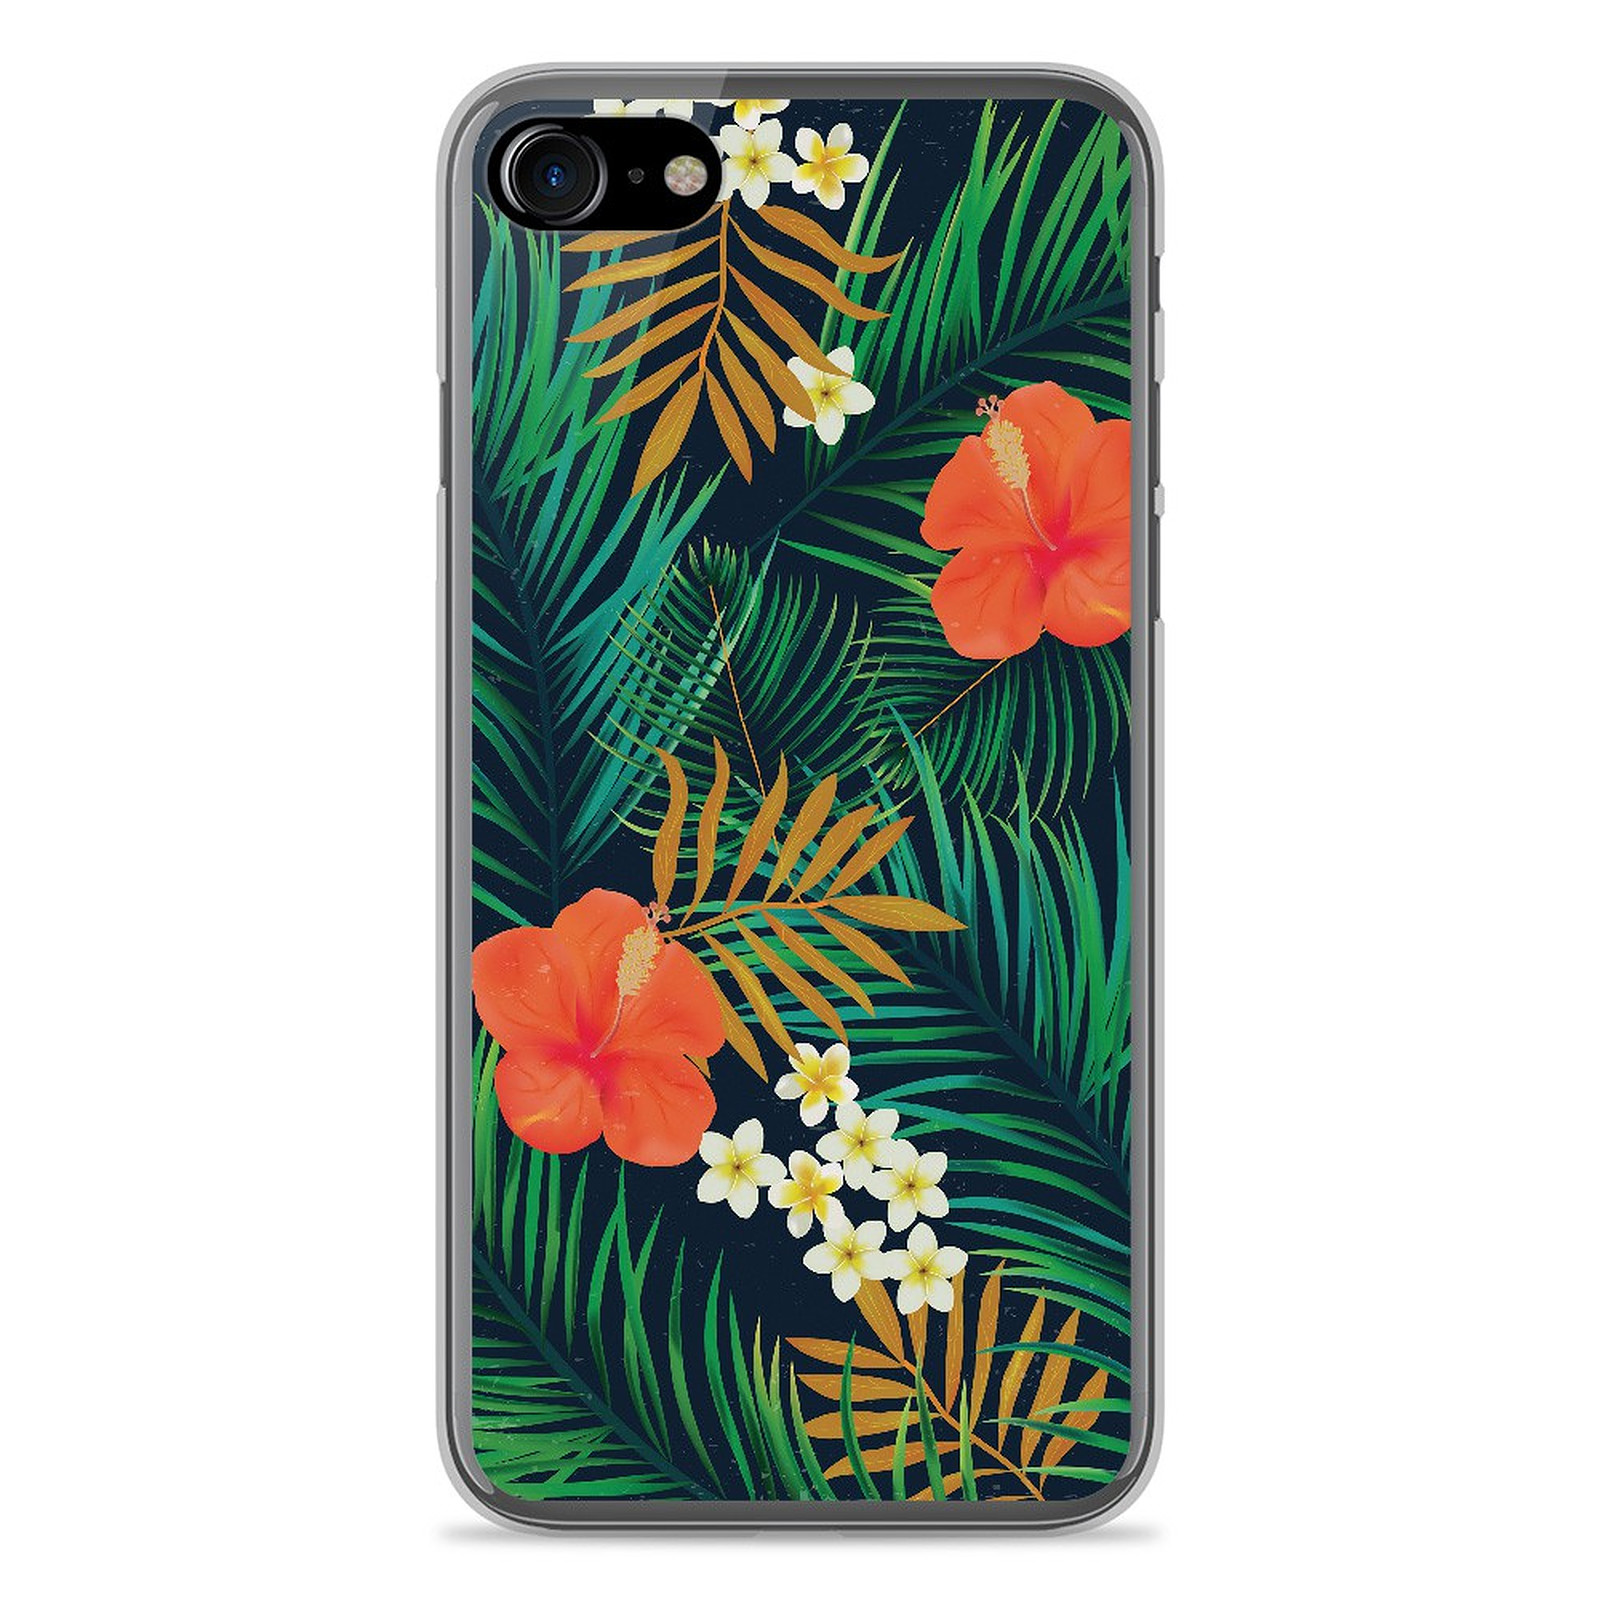 1001 Coques Coque silicone gel Apple IPhone 7 motif Tropical - Coque telephone 1001Coques